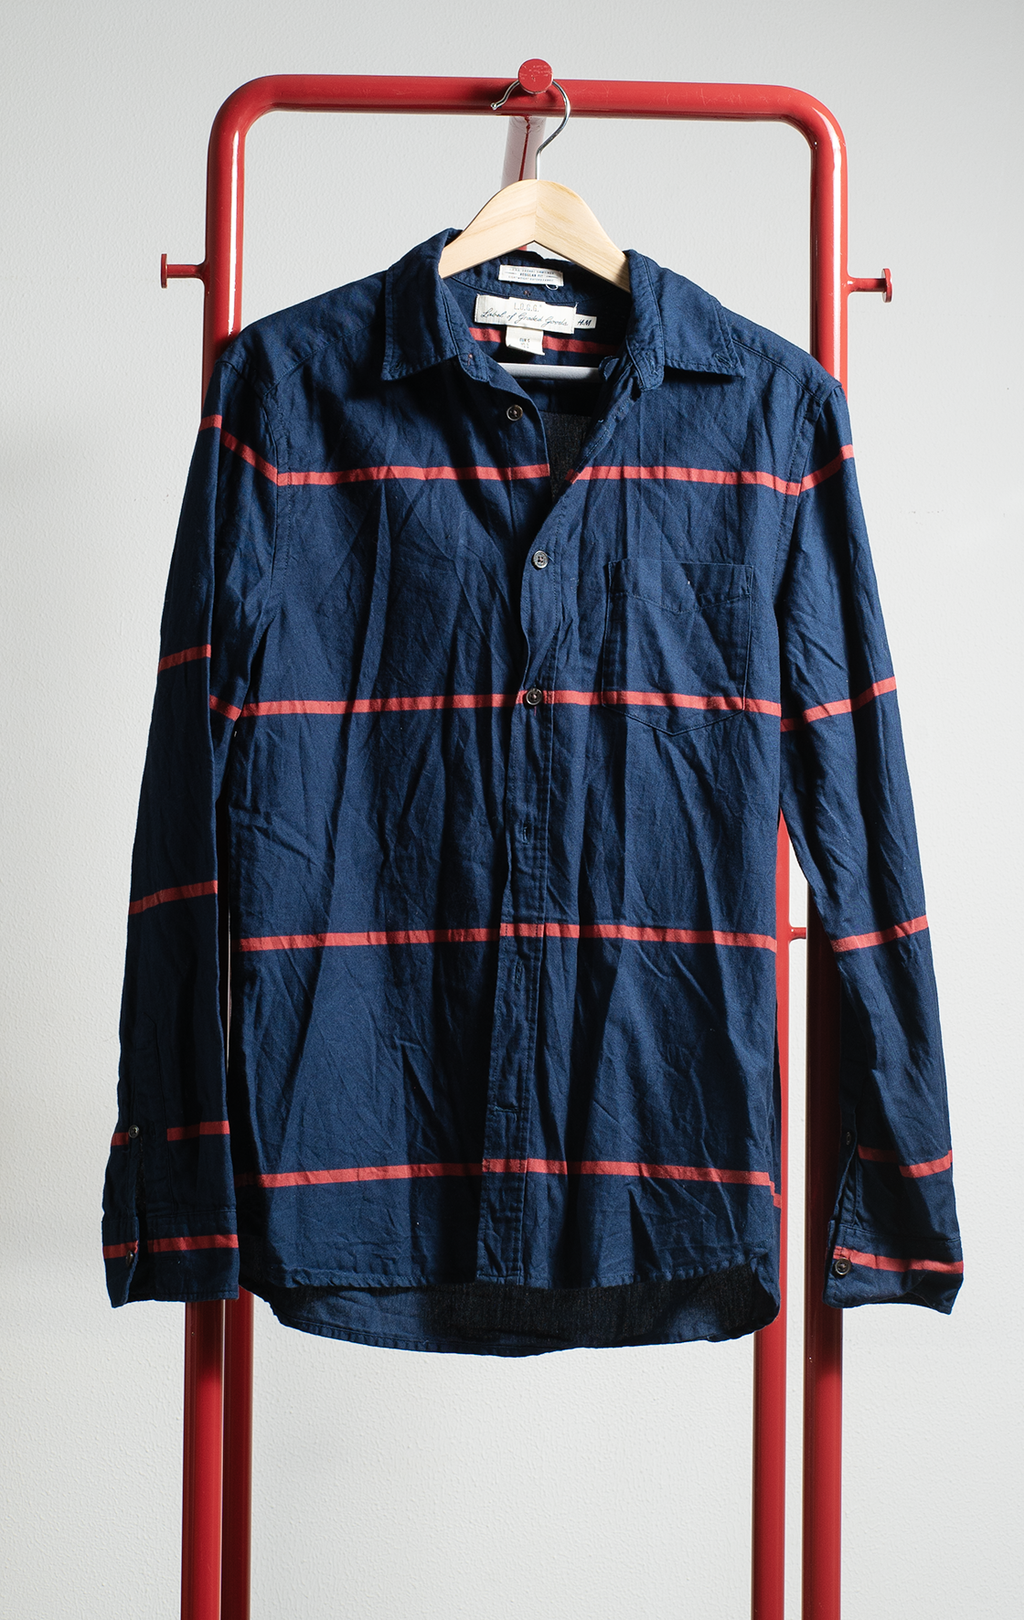 MEN H&M SHIRT - Navy with red lines - Small